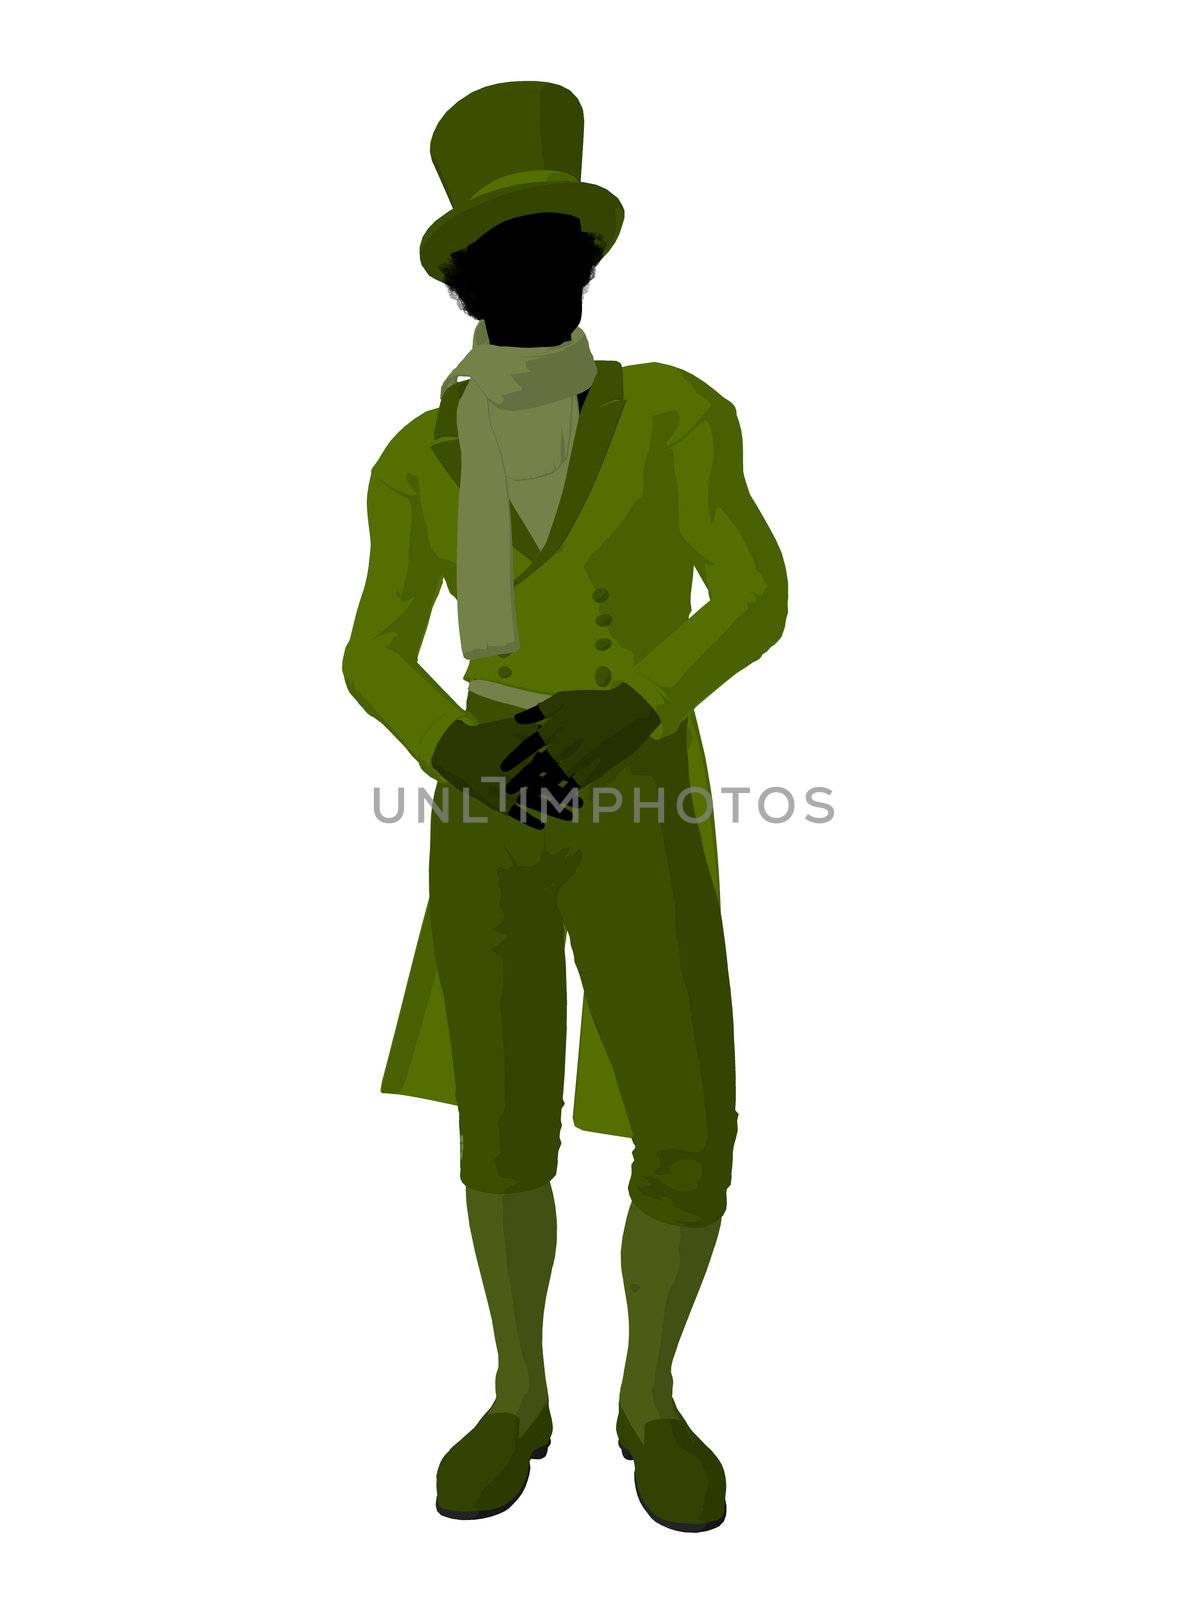 African american victorian man art illustration silhouette on a white background